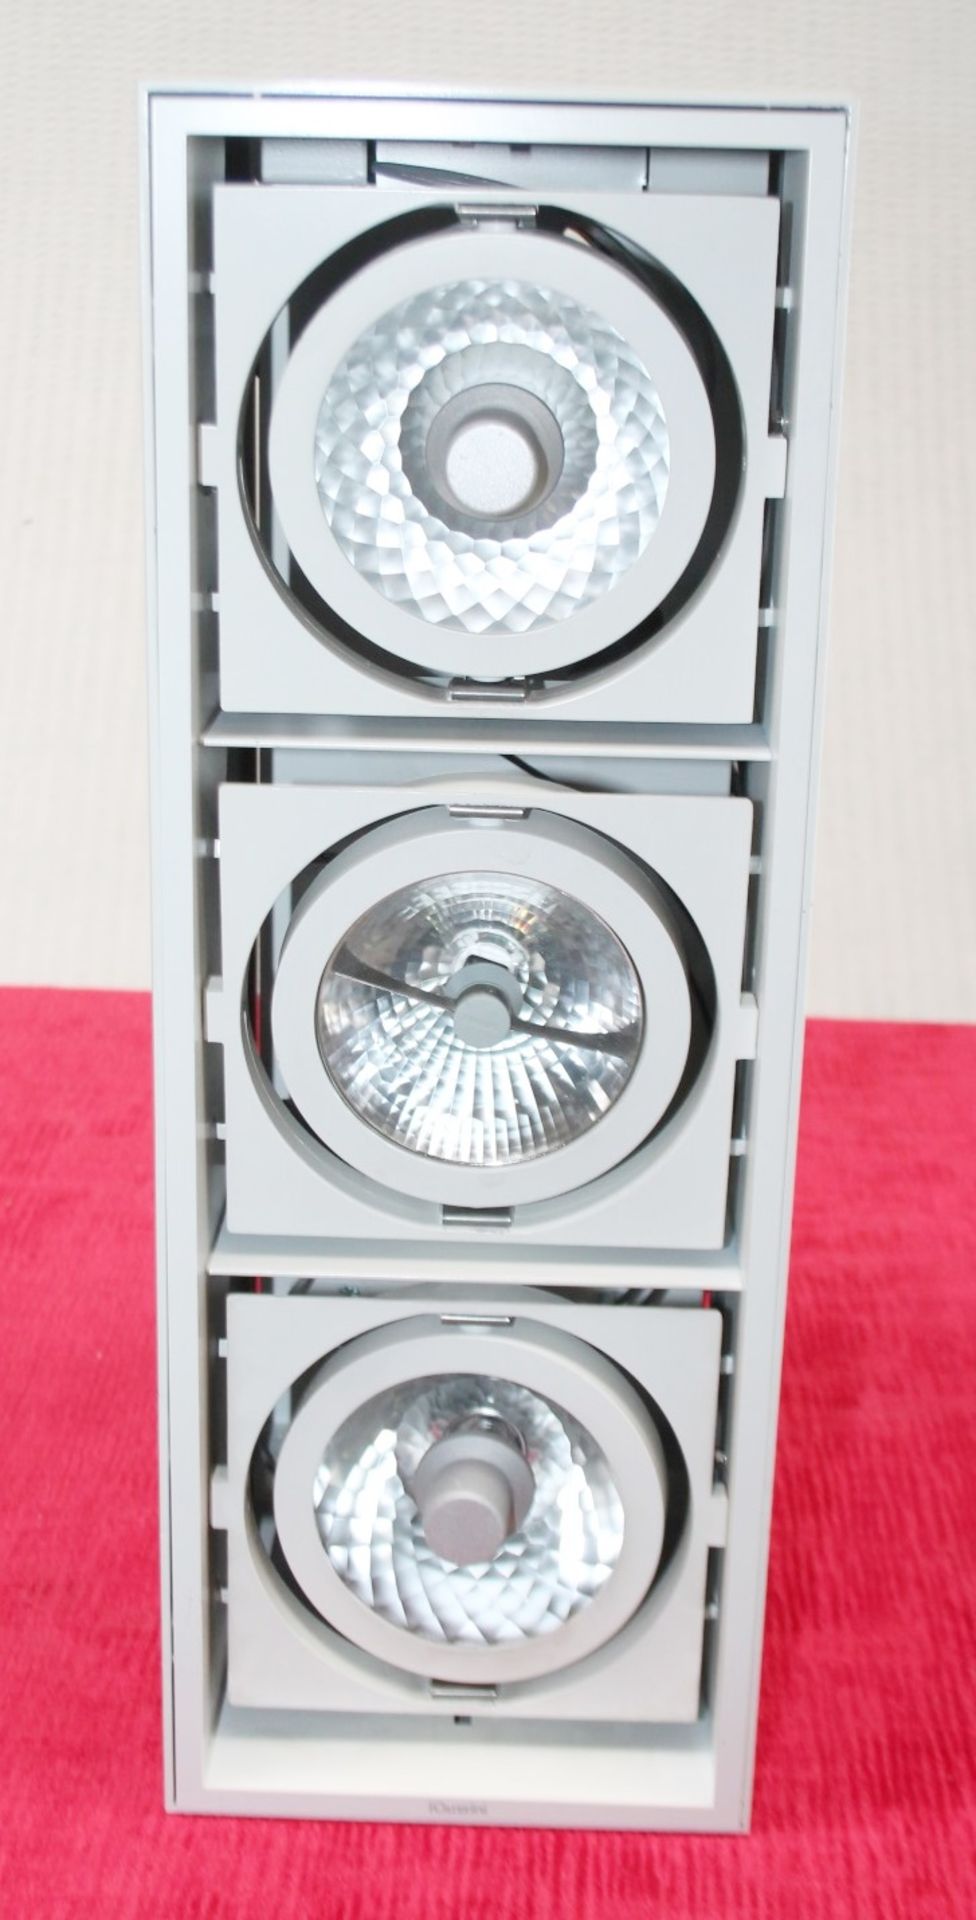 2 x IGUZZINI Commercial Triple Directional Gimble Spot Light Fittings In Metal Casings - Recently